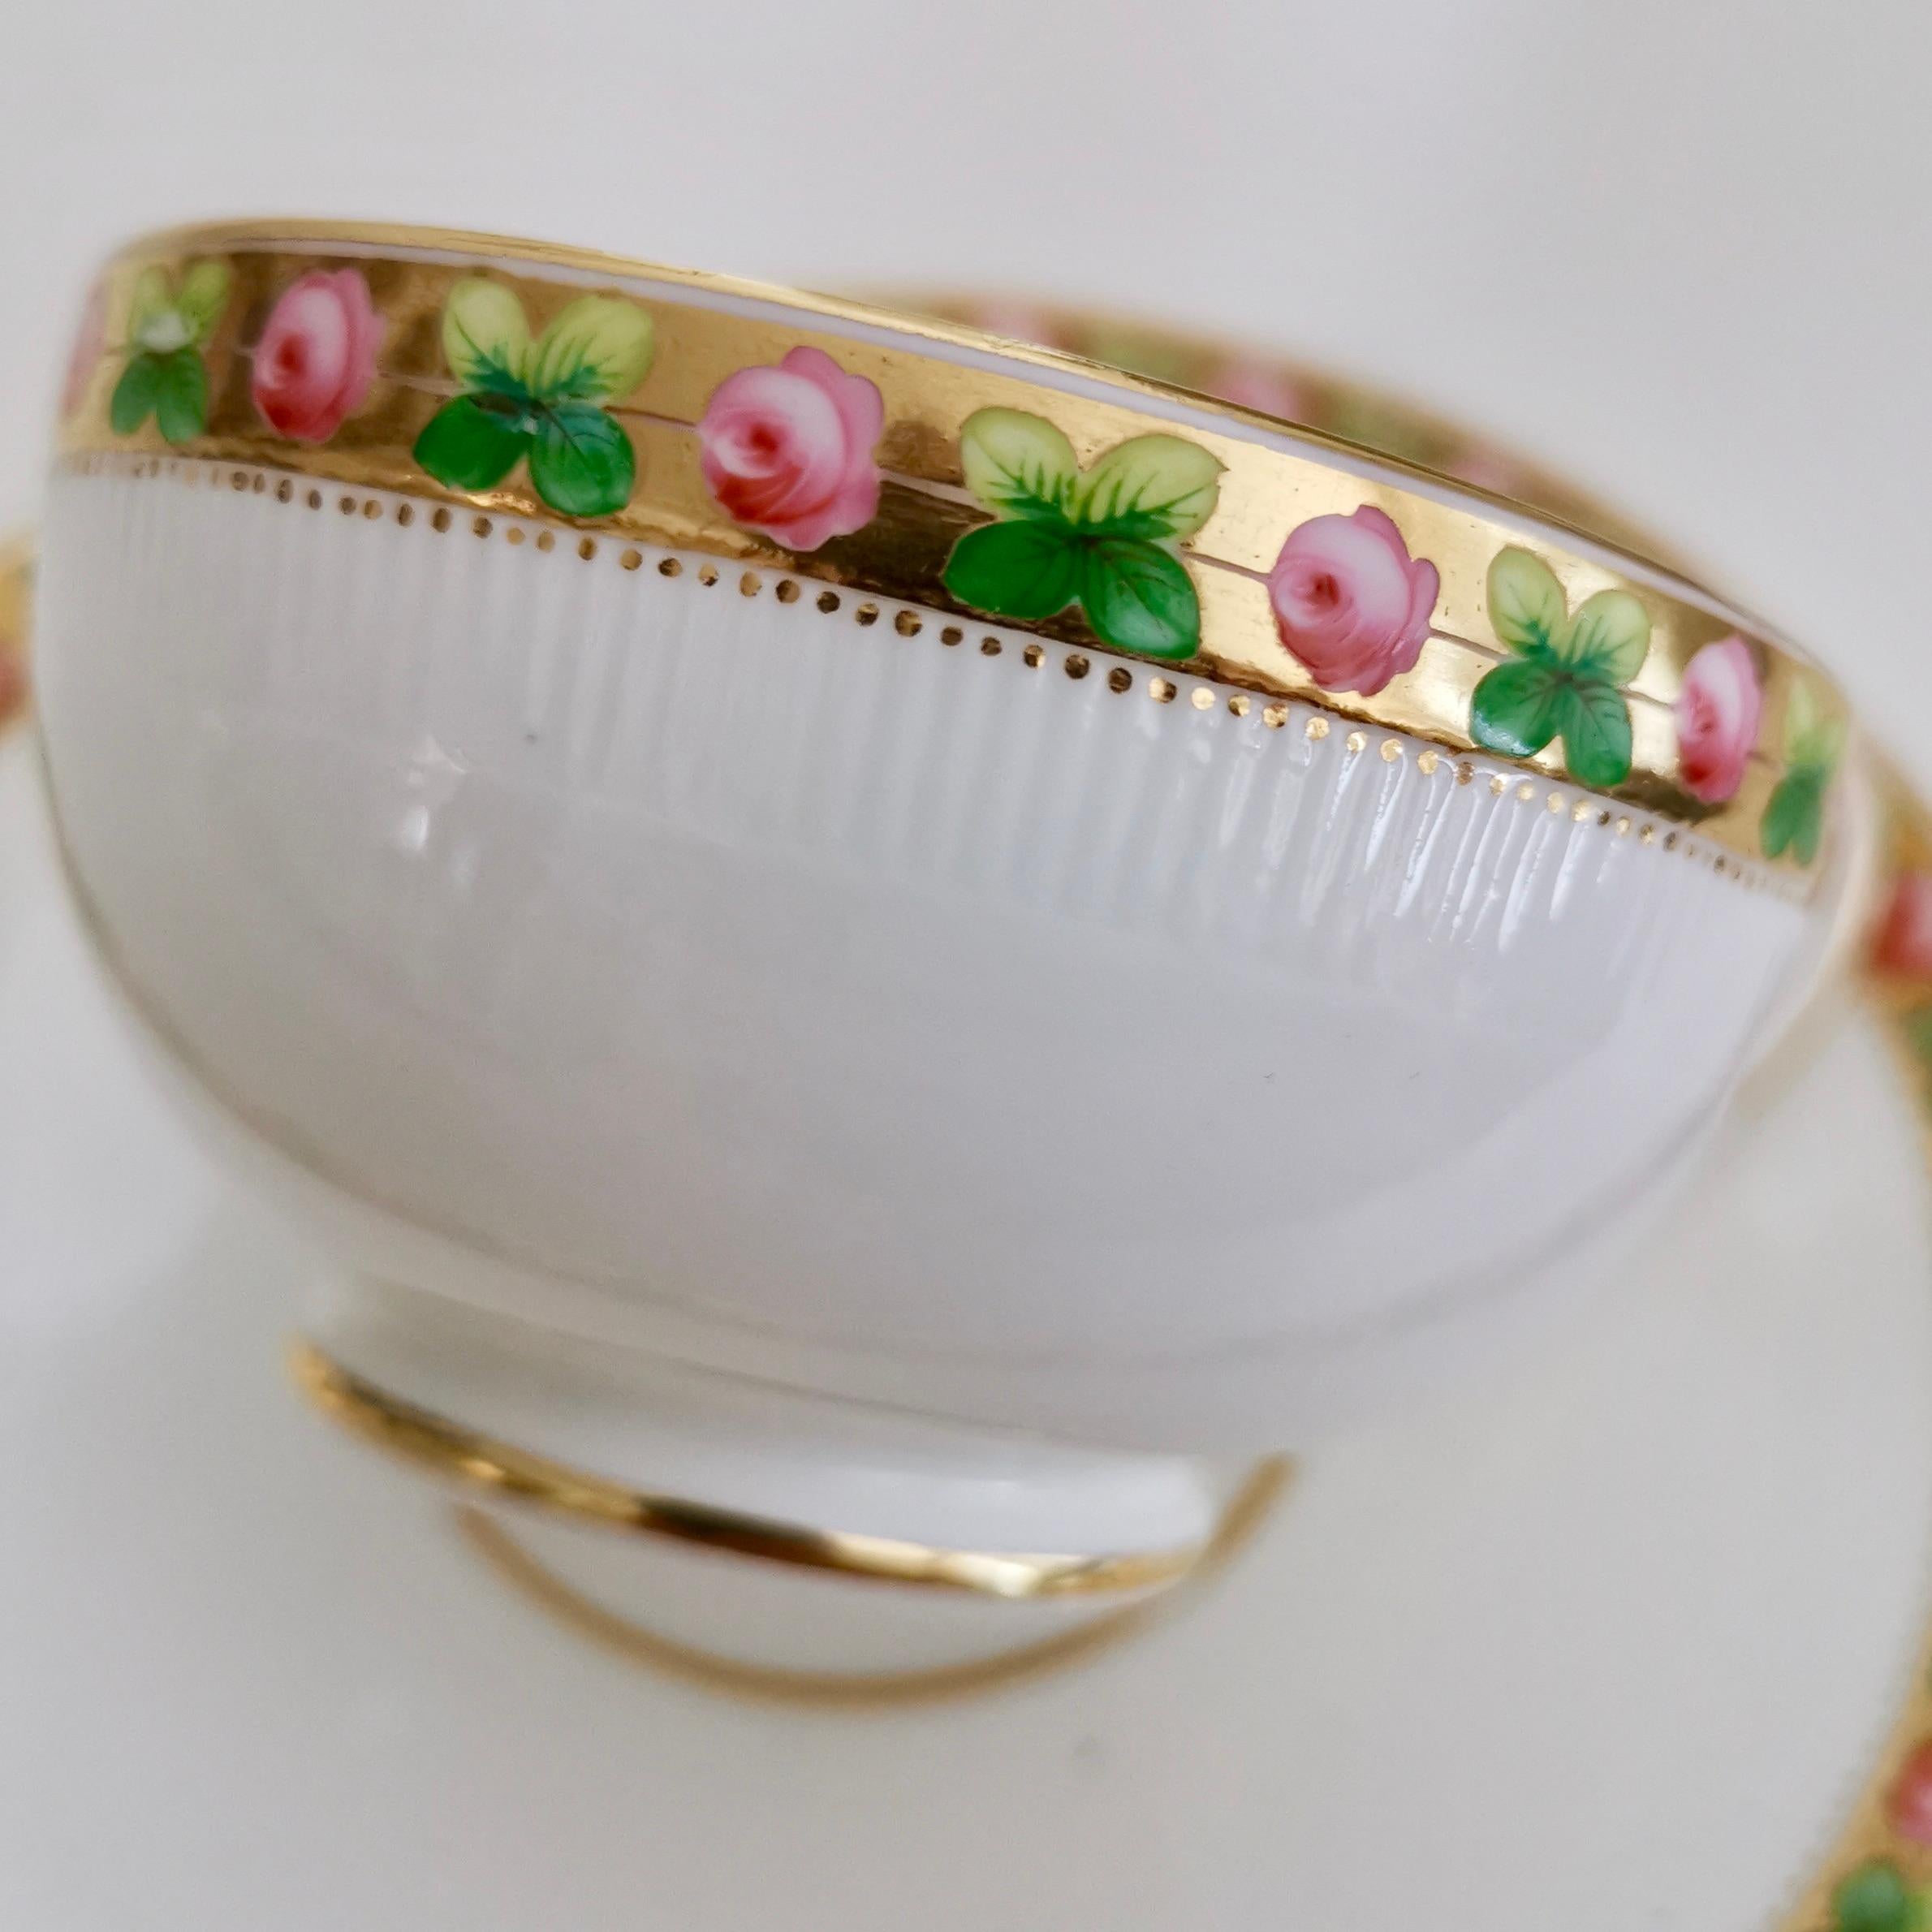 Minton Porcelain Teacup, White Paris Fluted with Roses and Gilt, 1862 2